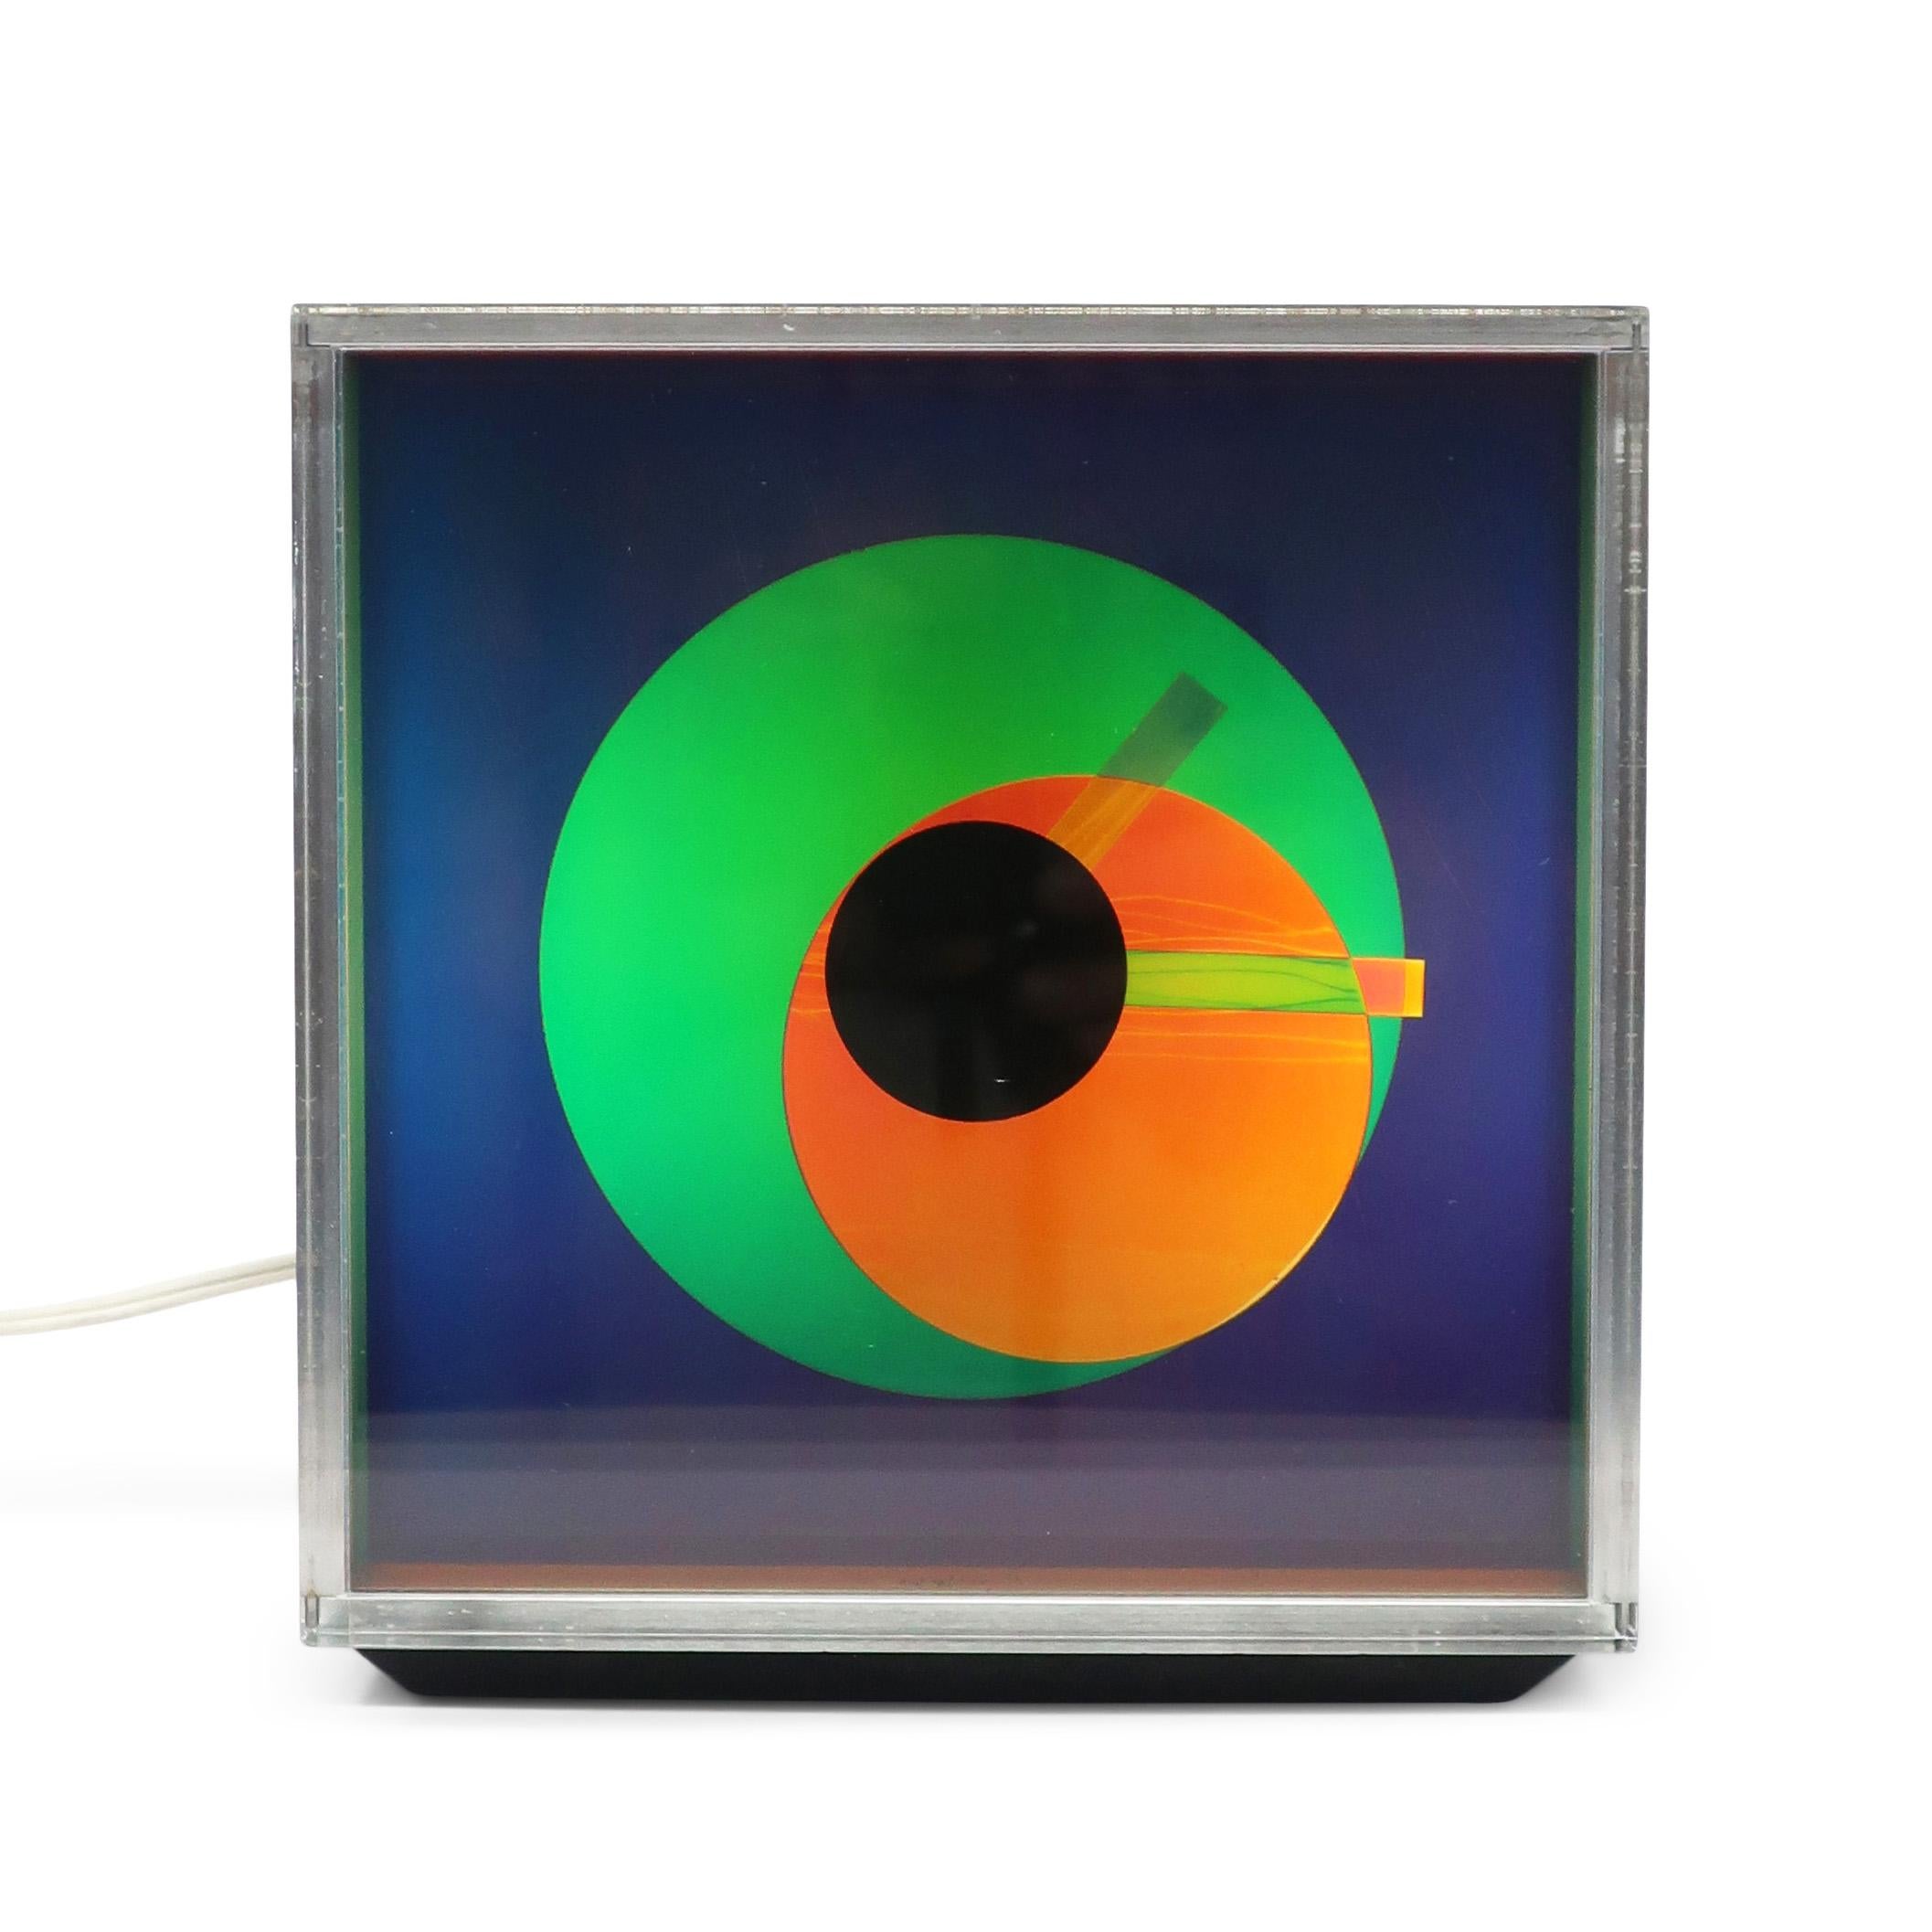 An op art inspired piece from 1976, the Prisma clock by Kirsch Hamilton Associates manages to capture vibrant colors, minimalism, and 1970s space age design.  This mysterious color changing clock has a chrome body, thick lucite lens over laminated